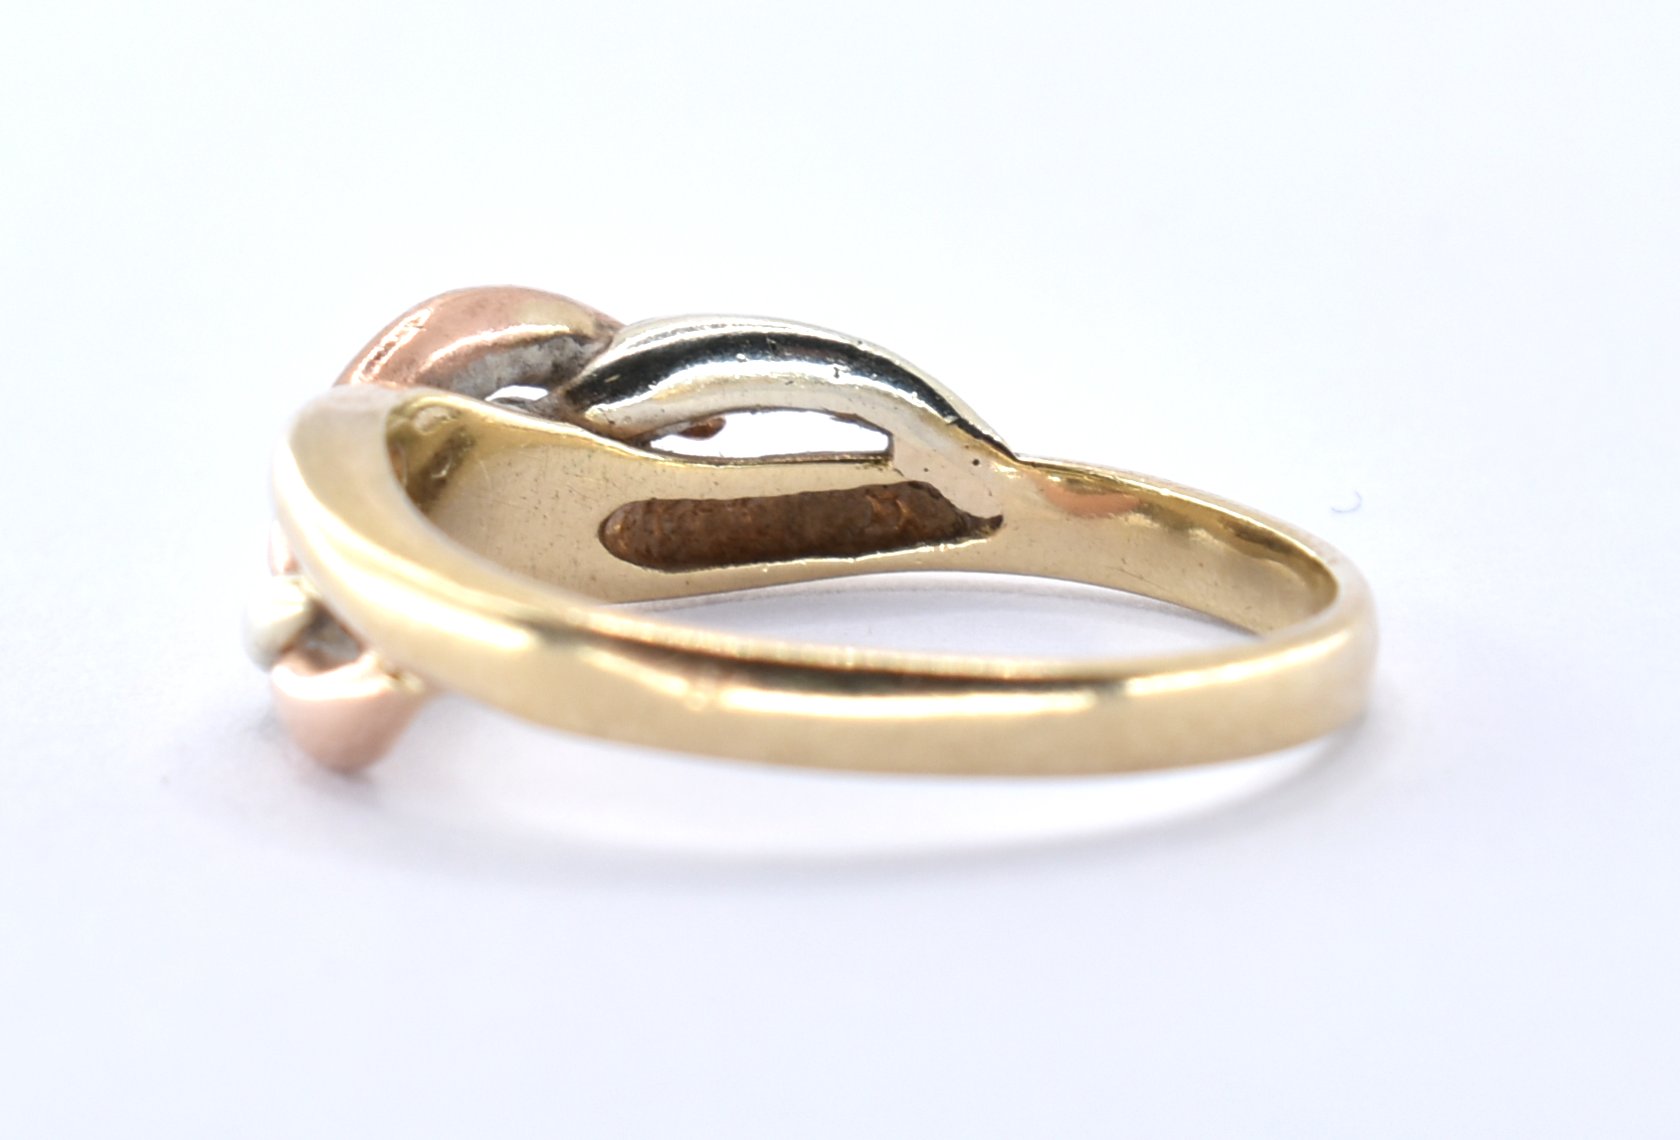 9CT TRI GOLD AND DIAMOND RING - Image 4 of 6